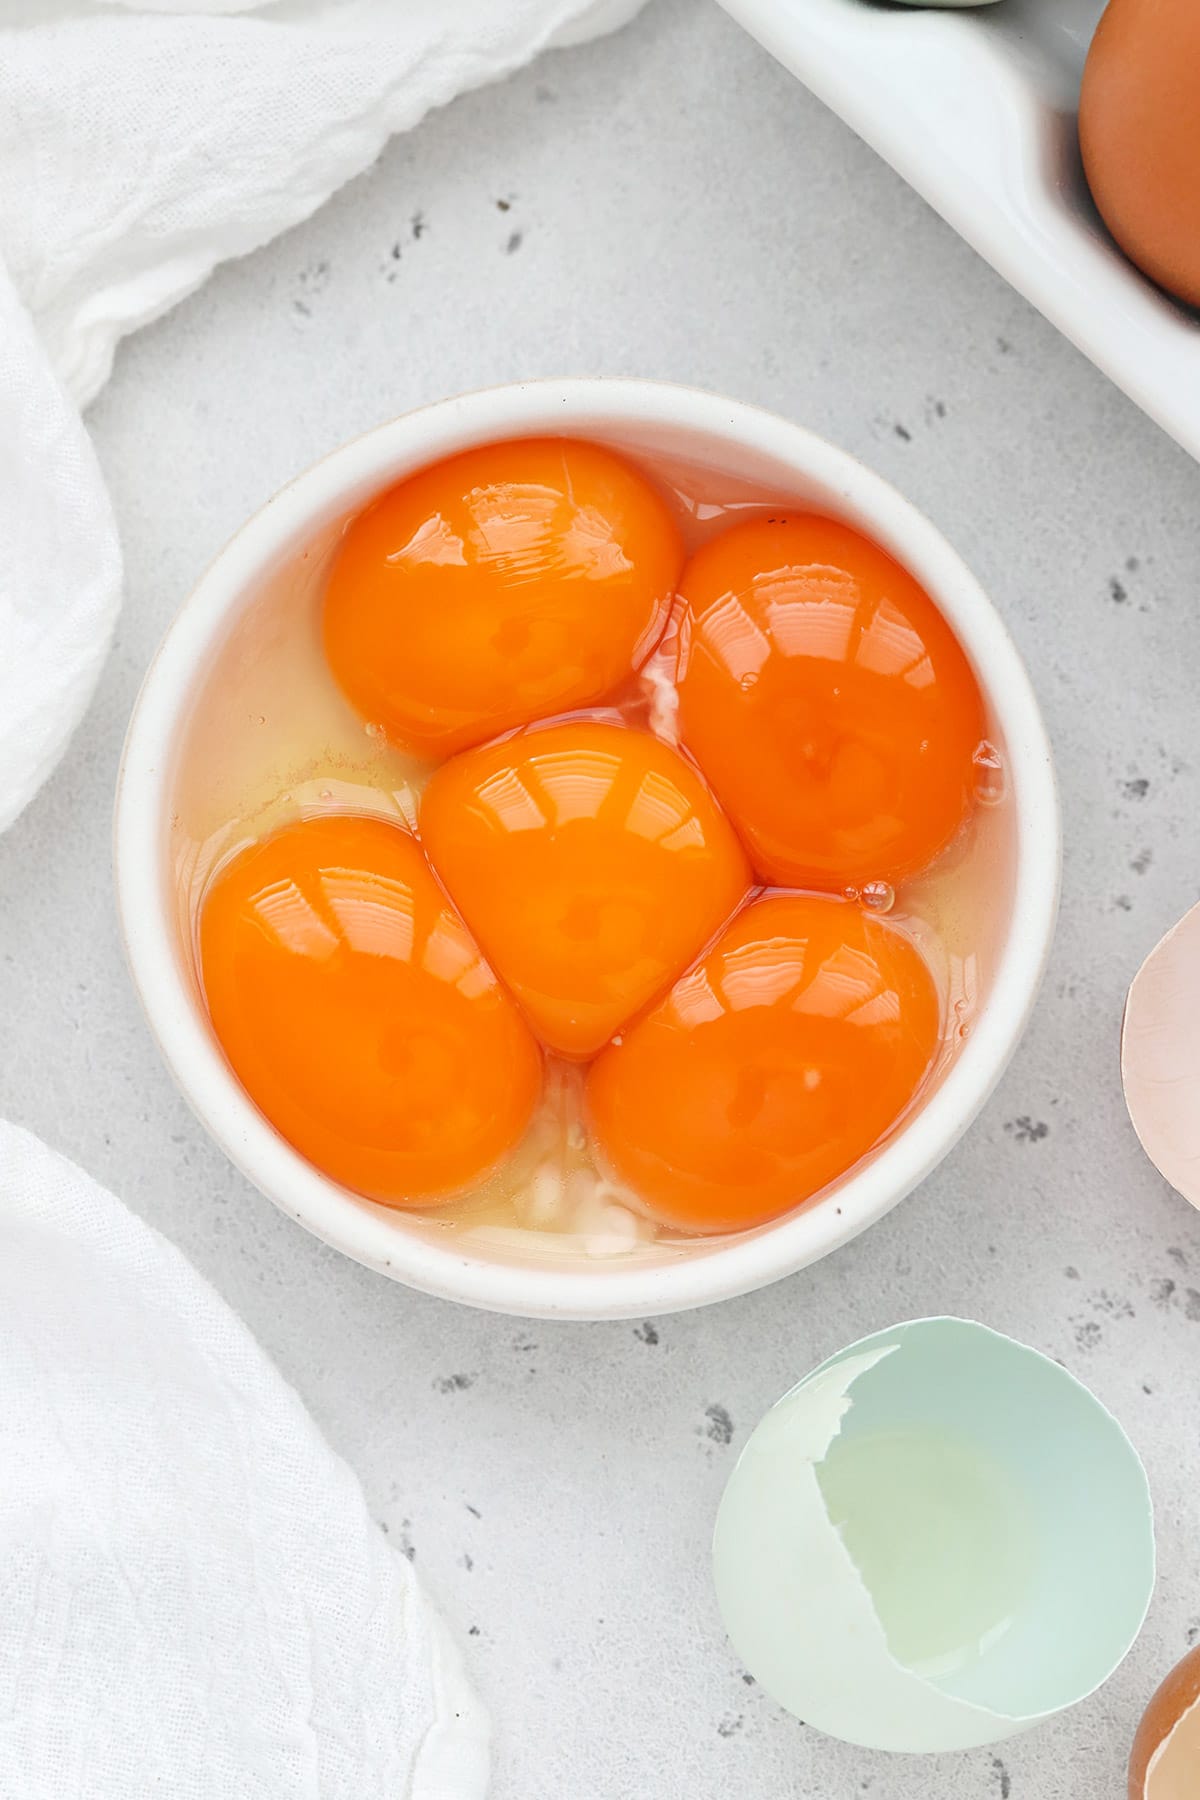 Overhead view of egg yolks in a small white bowl